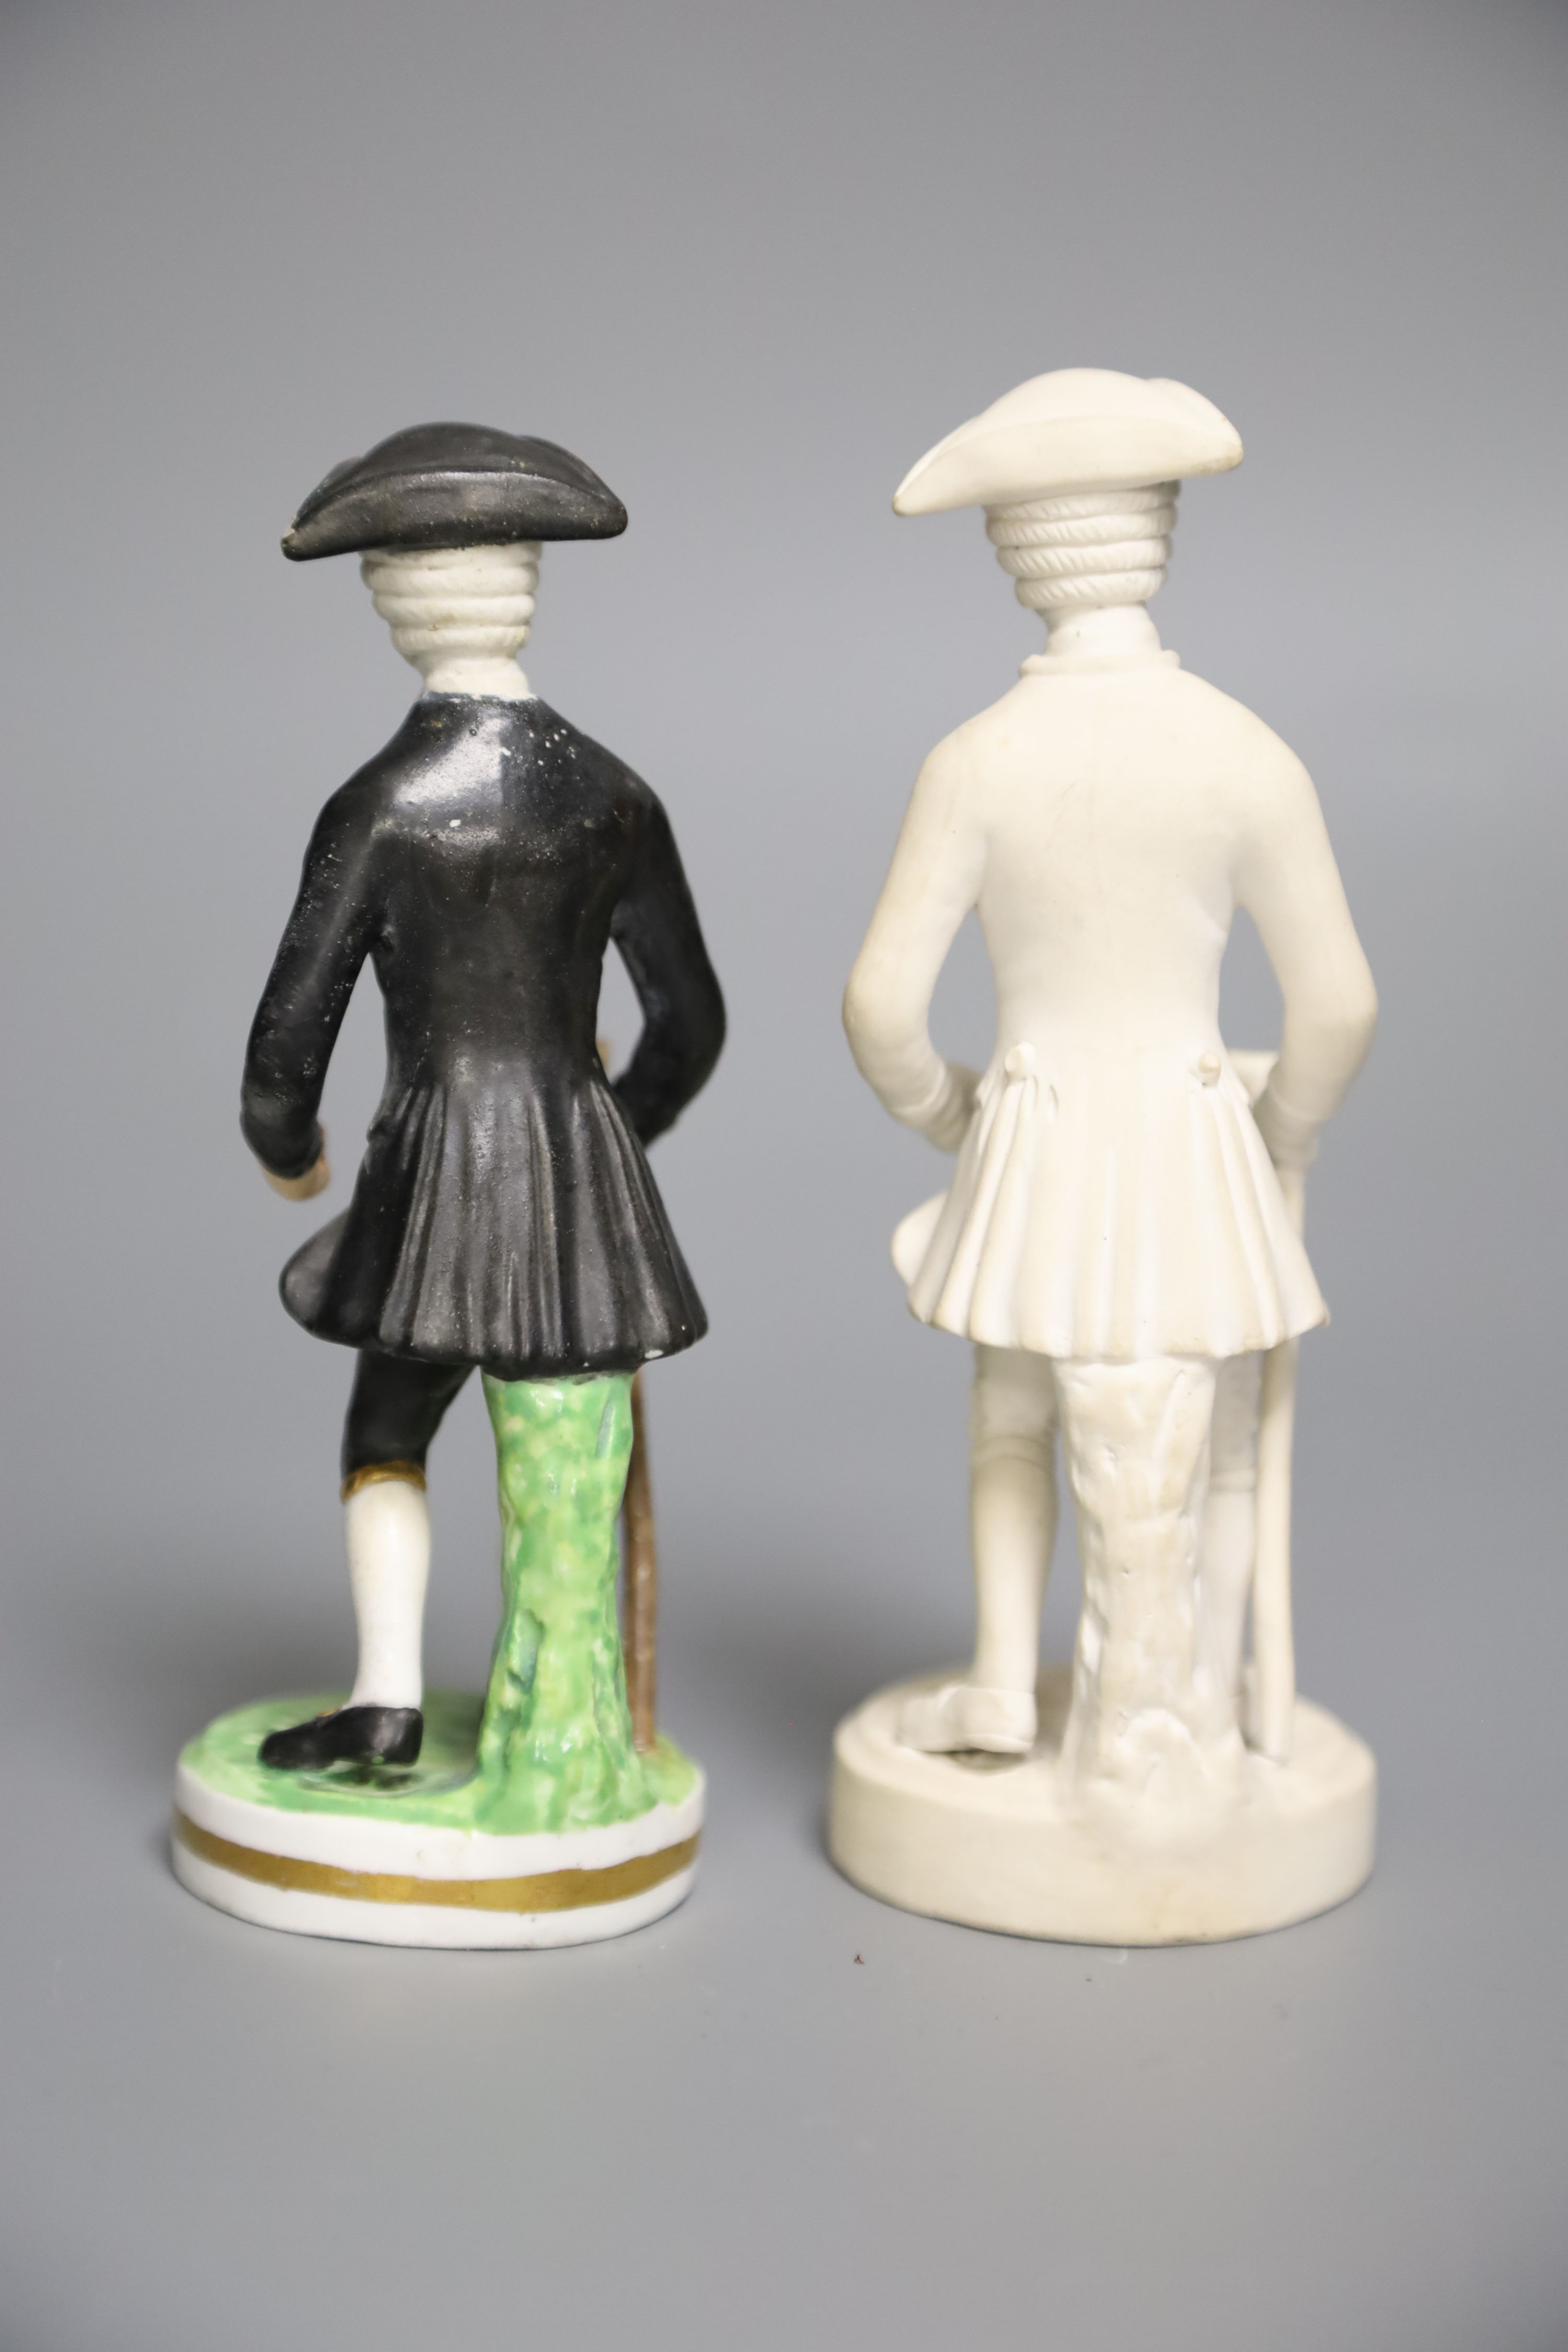 An early 19th century Derby rare biscuit figure of Dr. Syntax Walking and a later modelled Derby King Street of the same figure, 14cm